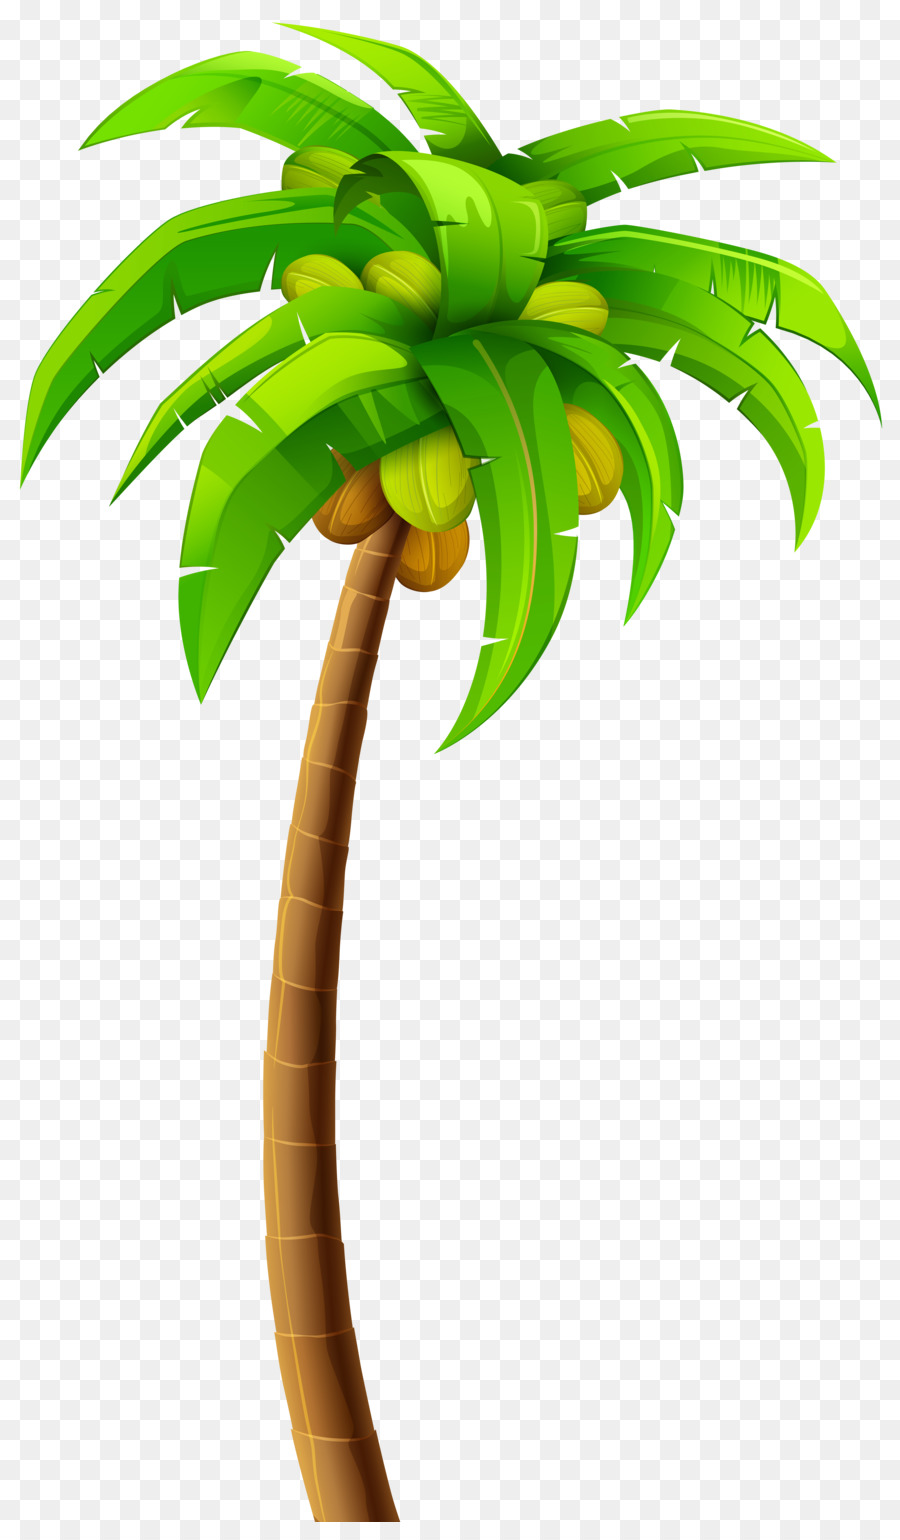 Tree Arecaceae Clip art - palm tree png download - 4730*8000 - Free Transparent Tree png Download.